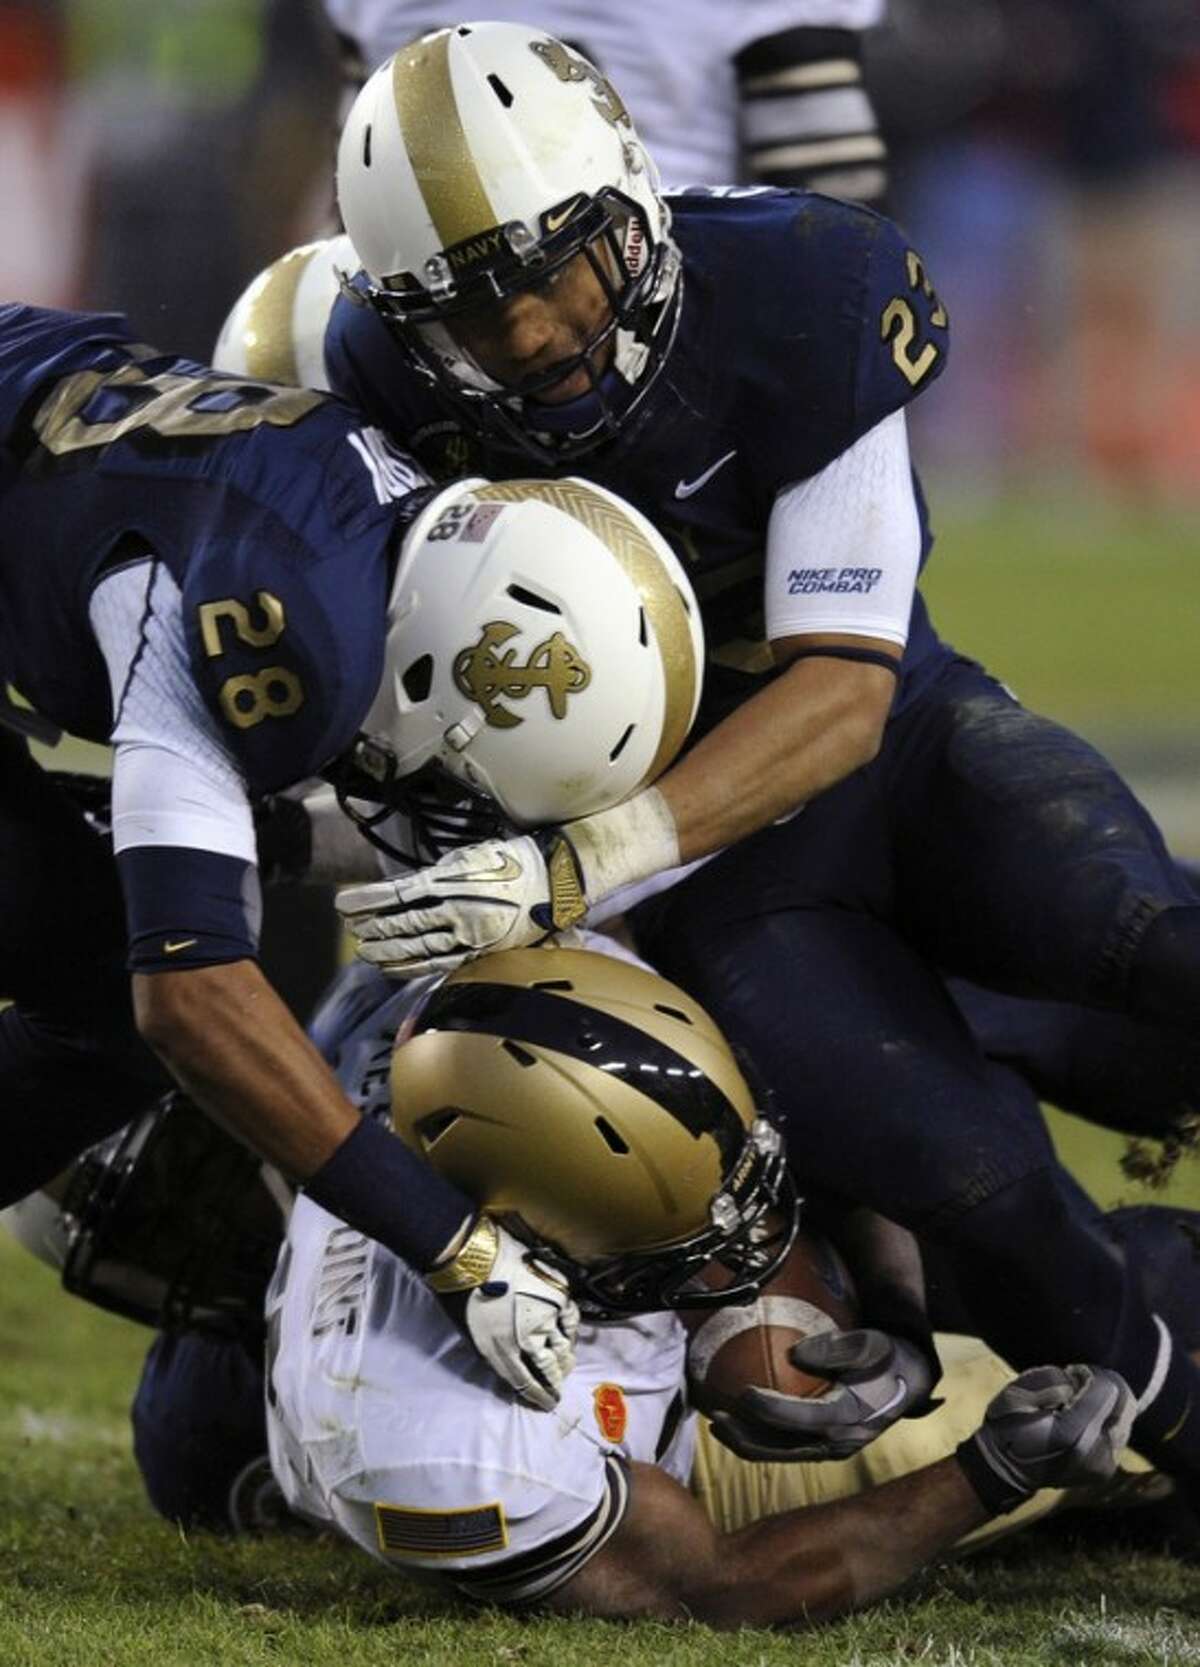 Navy defenders David Sperry (28) and Eric Graham (23) tackle Army running back Larry Dixon in the second half of an NCAA college football game in Landover, Md., Saturday, Dec. 10, 2011. (AP Photo/Nick Wass)